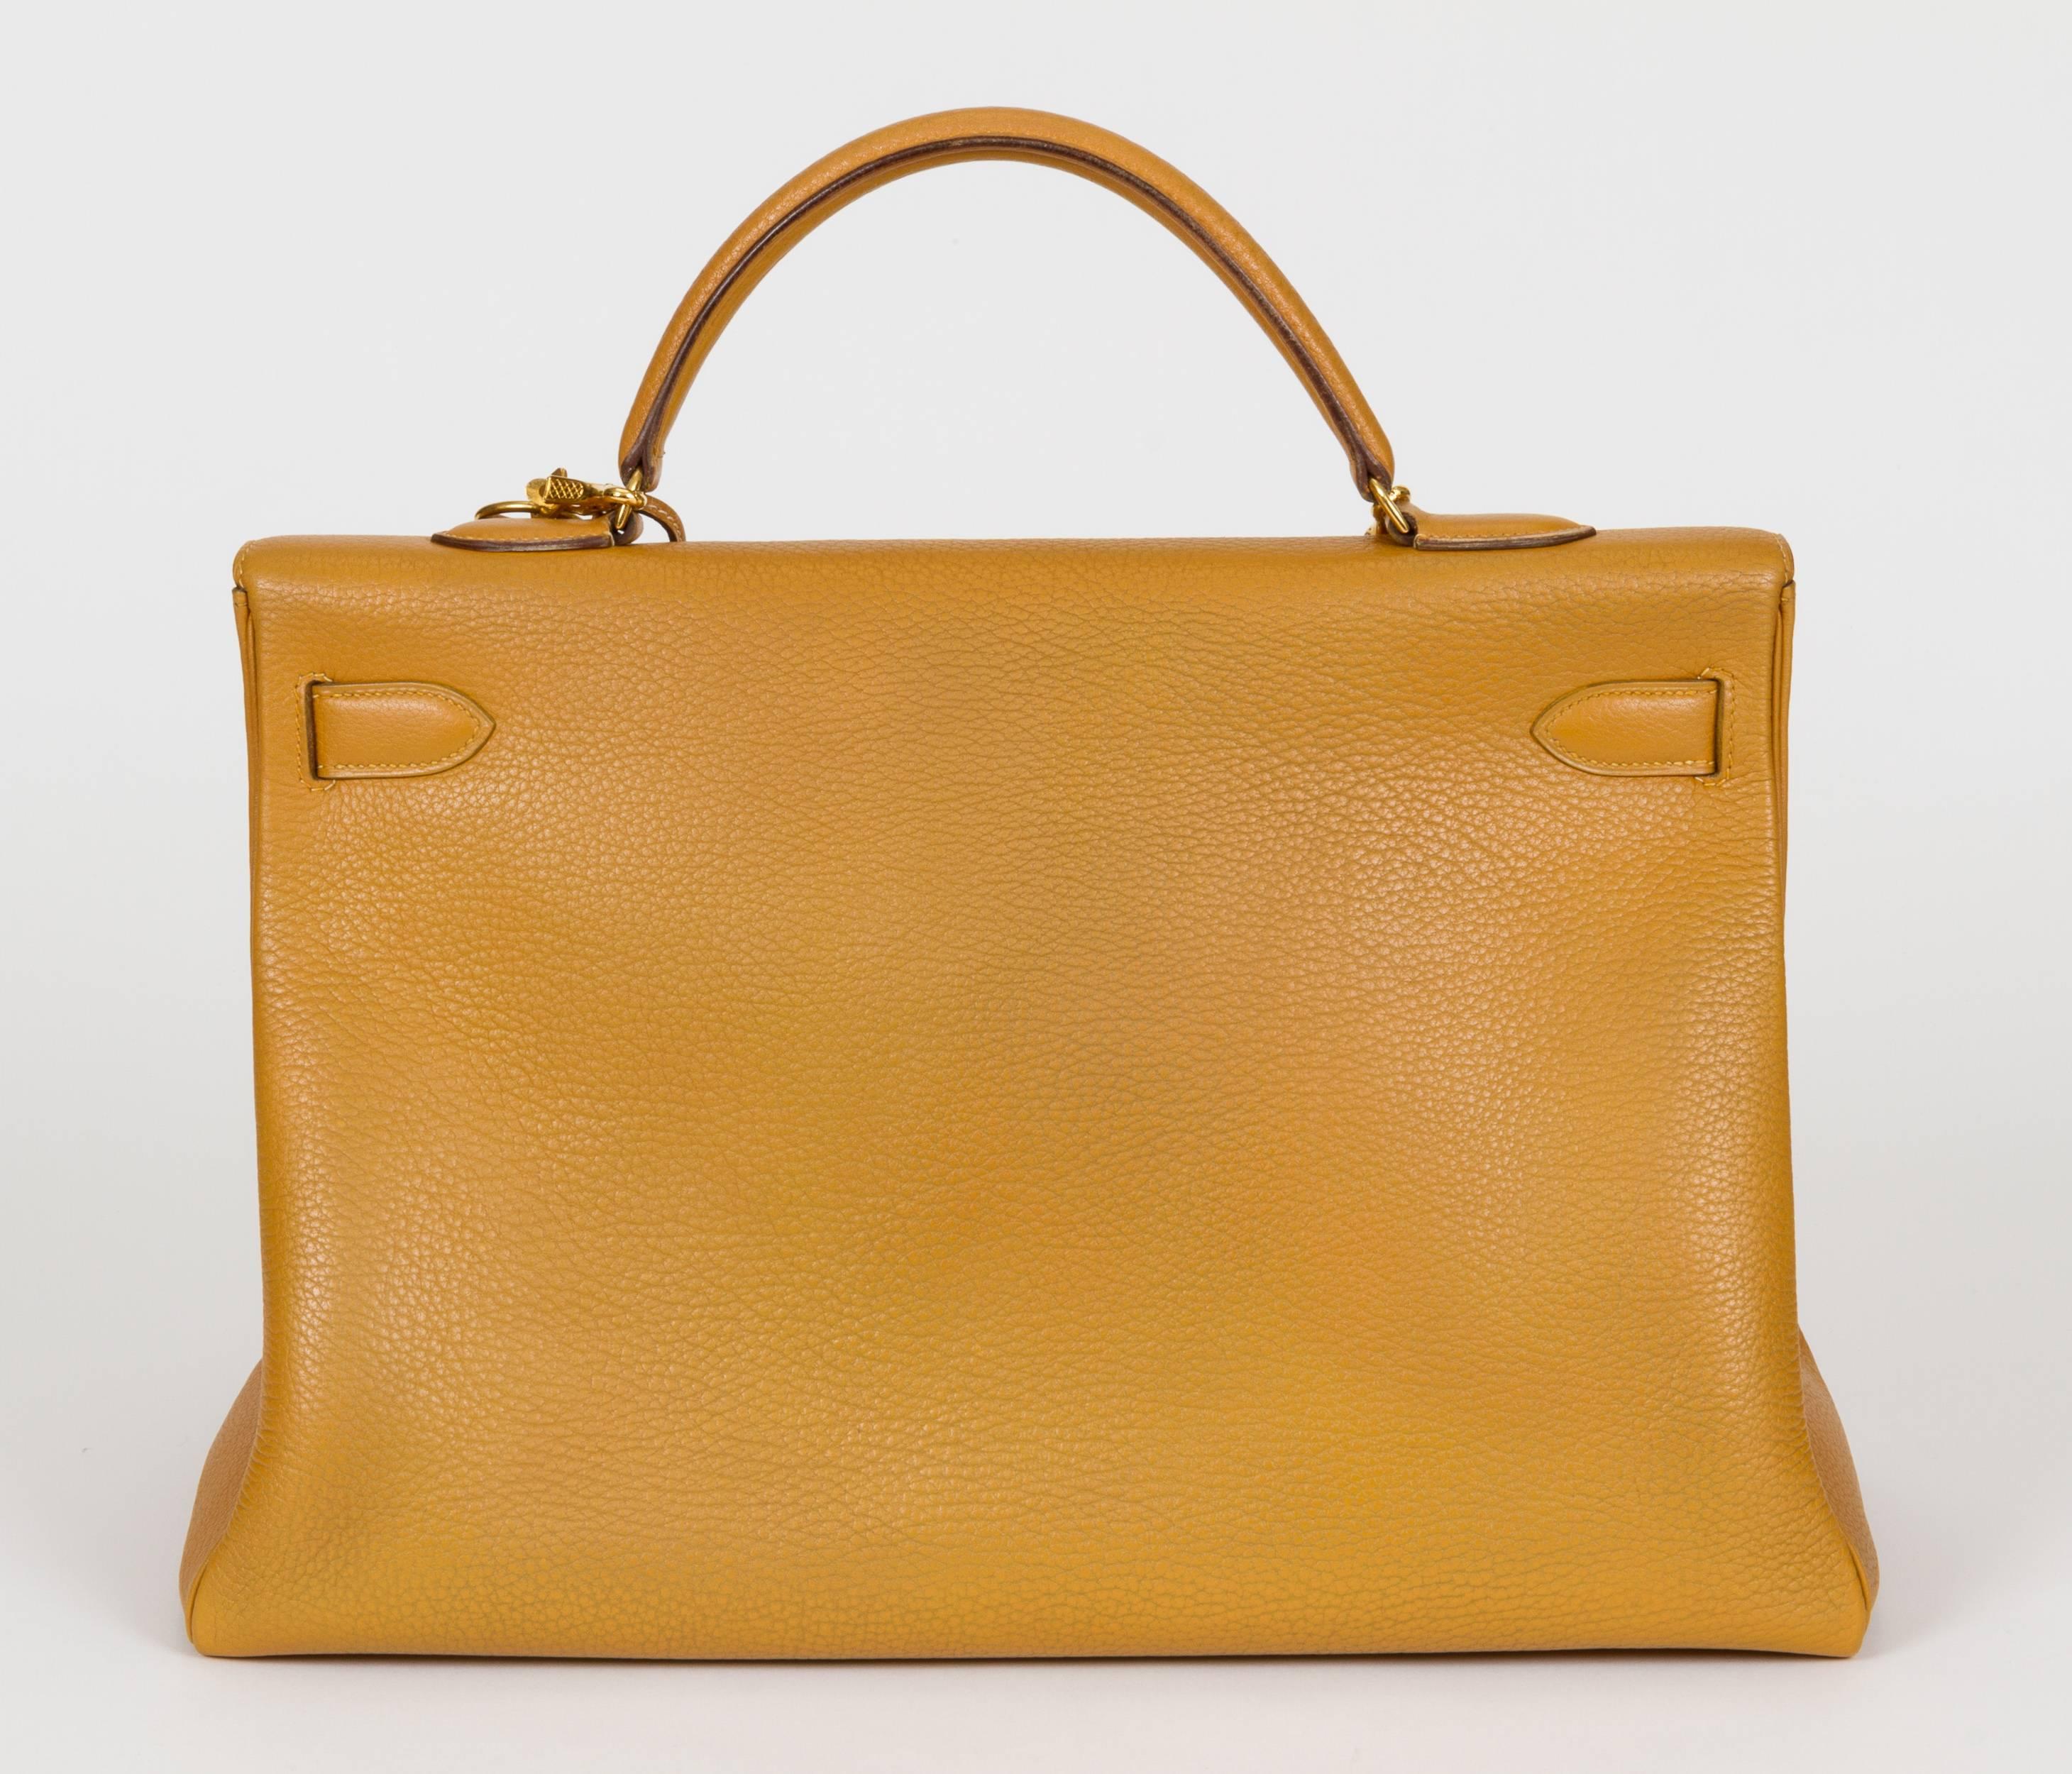 1990's Hermès kelly 40 cm in ardenne natural leather and goldtone hardware. Comes with original dust bag. Handle drop, 4